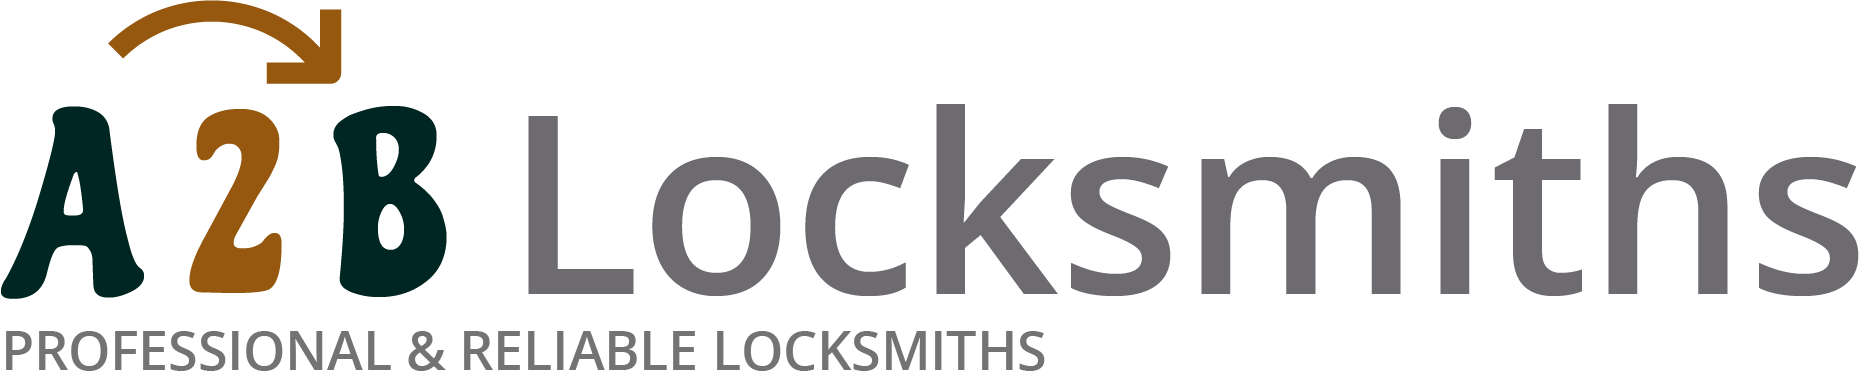 If you are locked out of house in Aylesbury, our 24/7 local emergency locksmith services can help you.